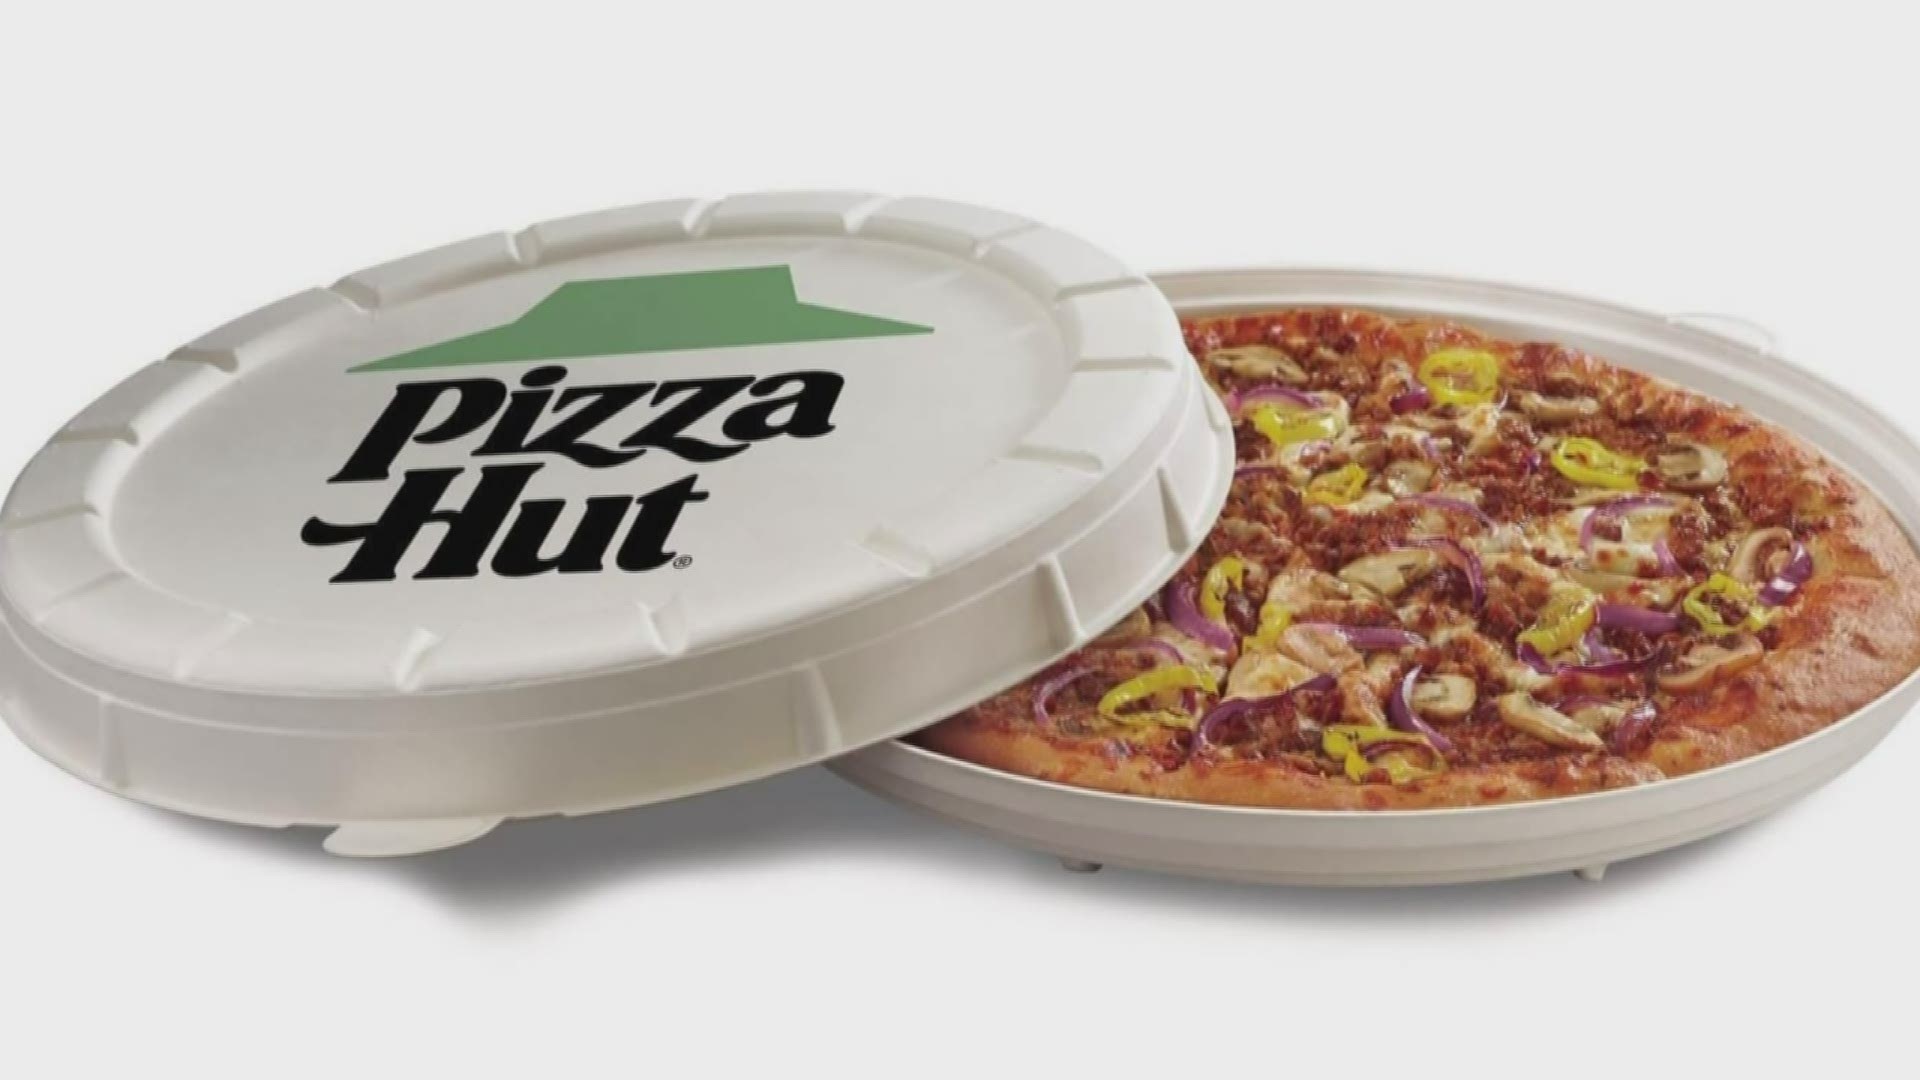 Pizza Hut will be testing a based plant sausage topping and round pizza boxes exclusively in Phoenix and only on Wed. Oct. 23.